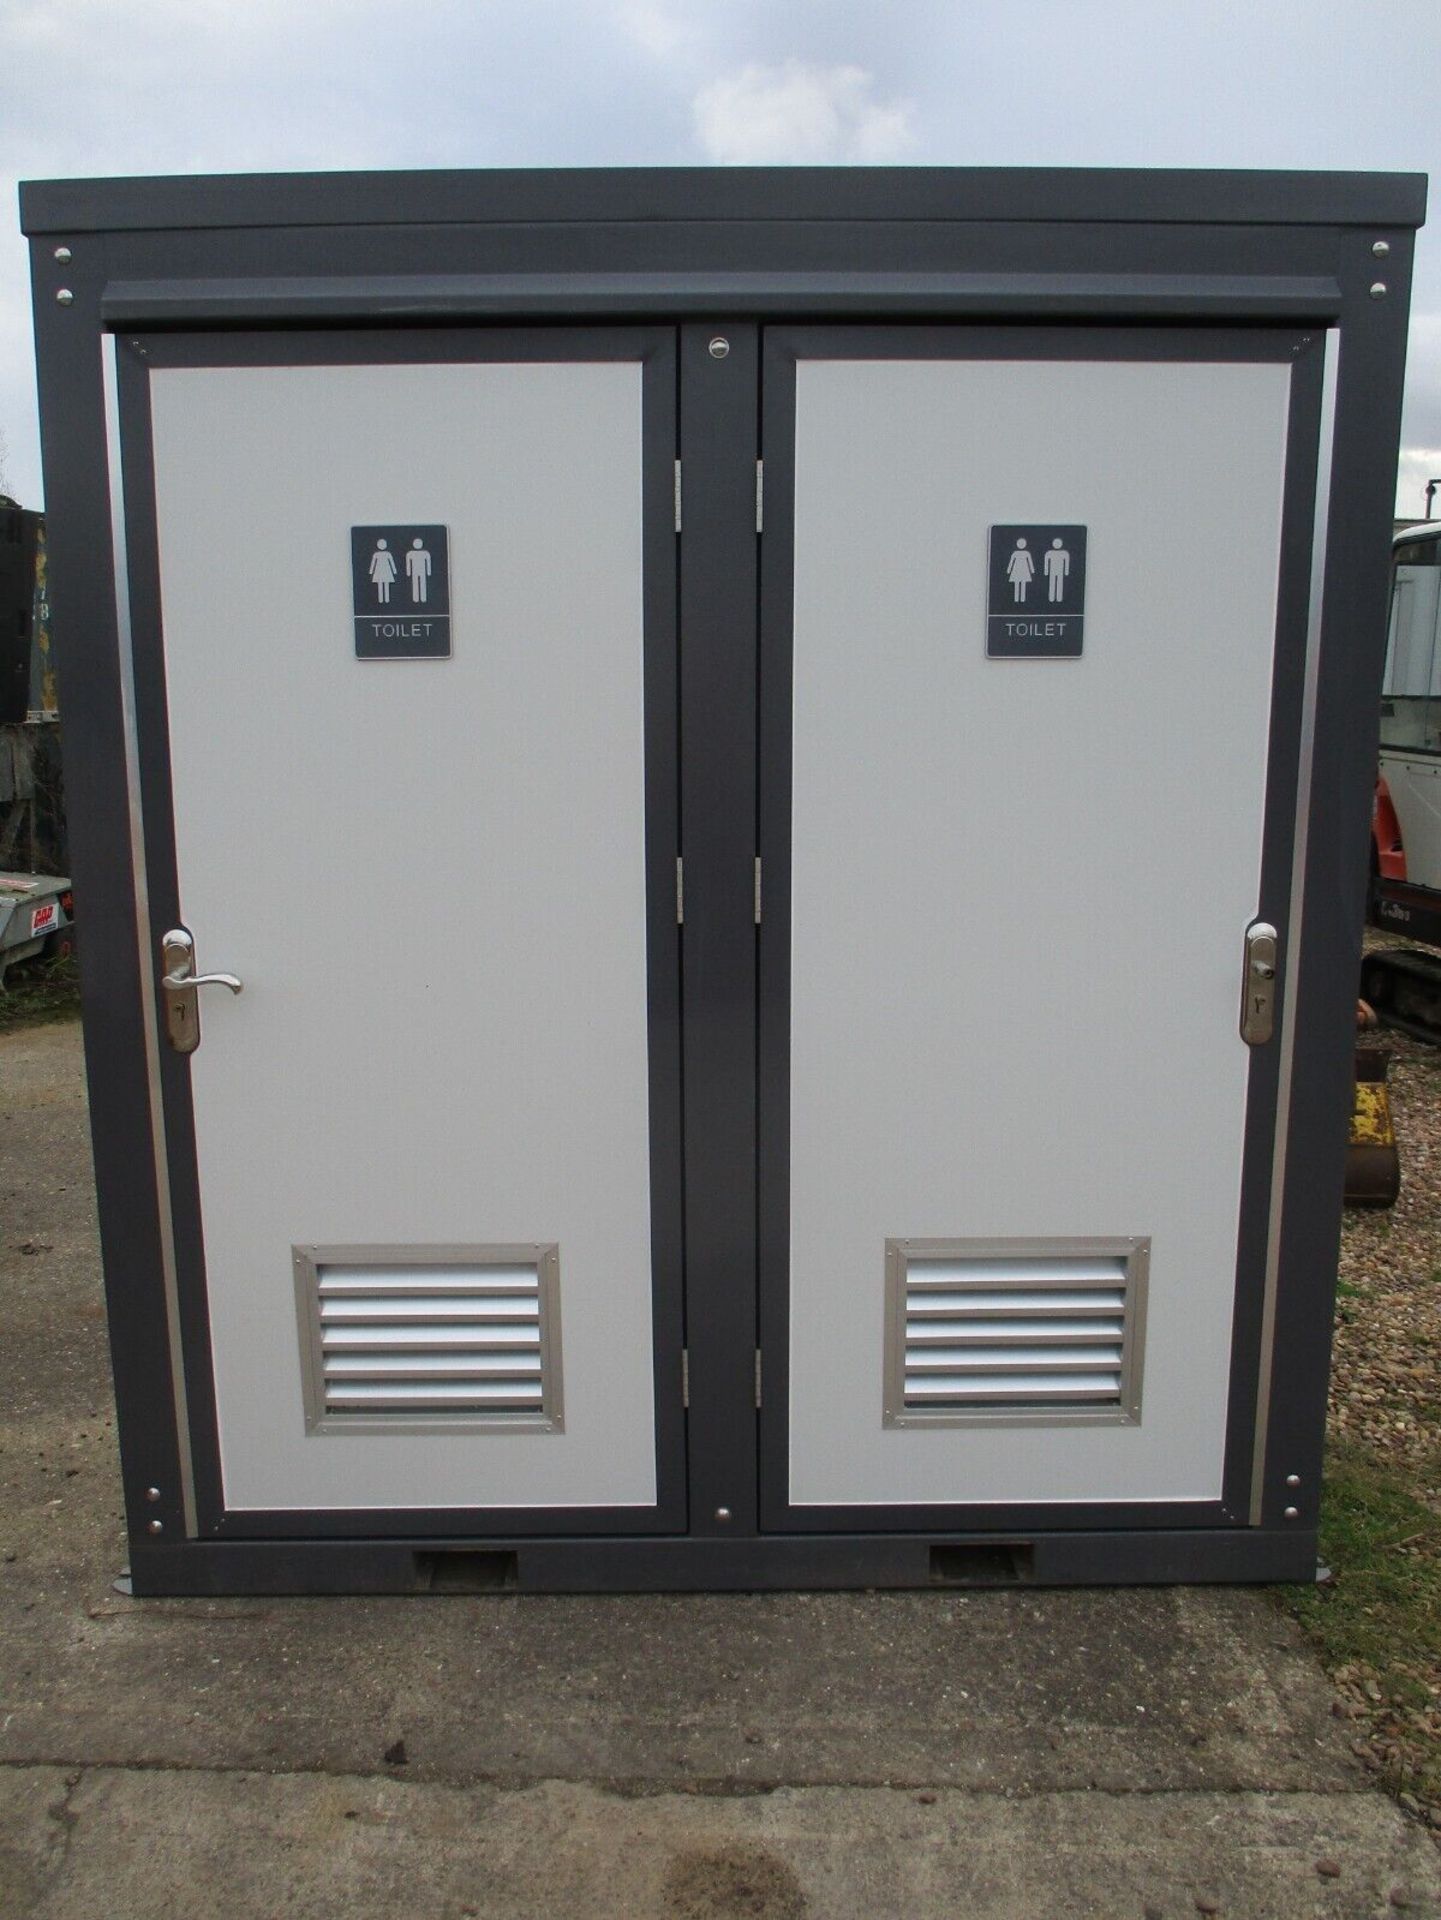 COMPACT COMFORT: 2.15M X 1.3M SHIPPING CONTAINER TOILET OASIS - Image 9 of 9